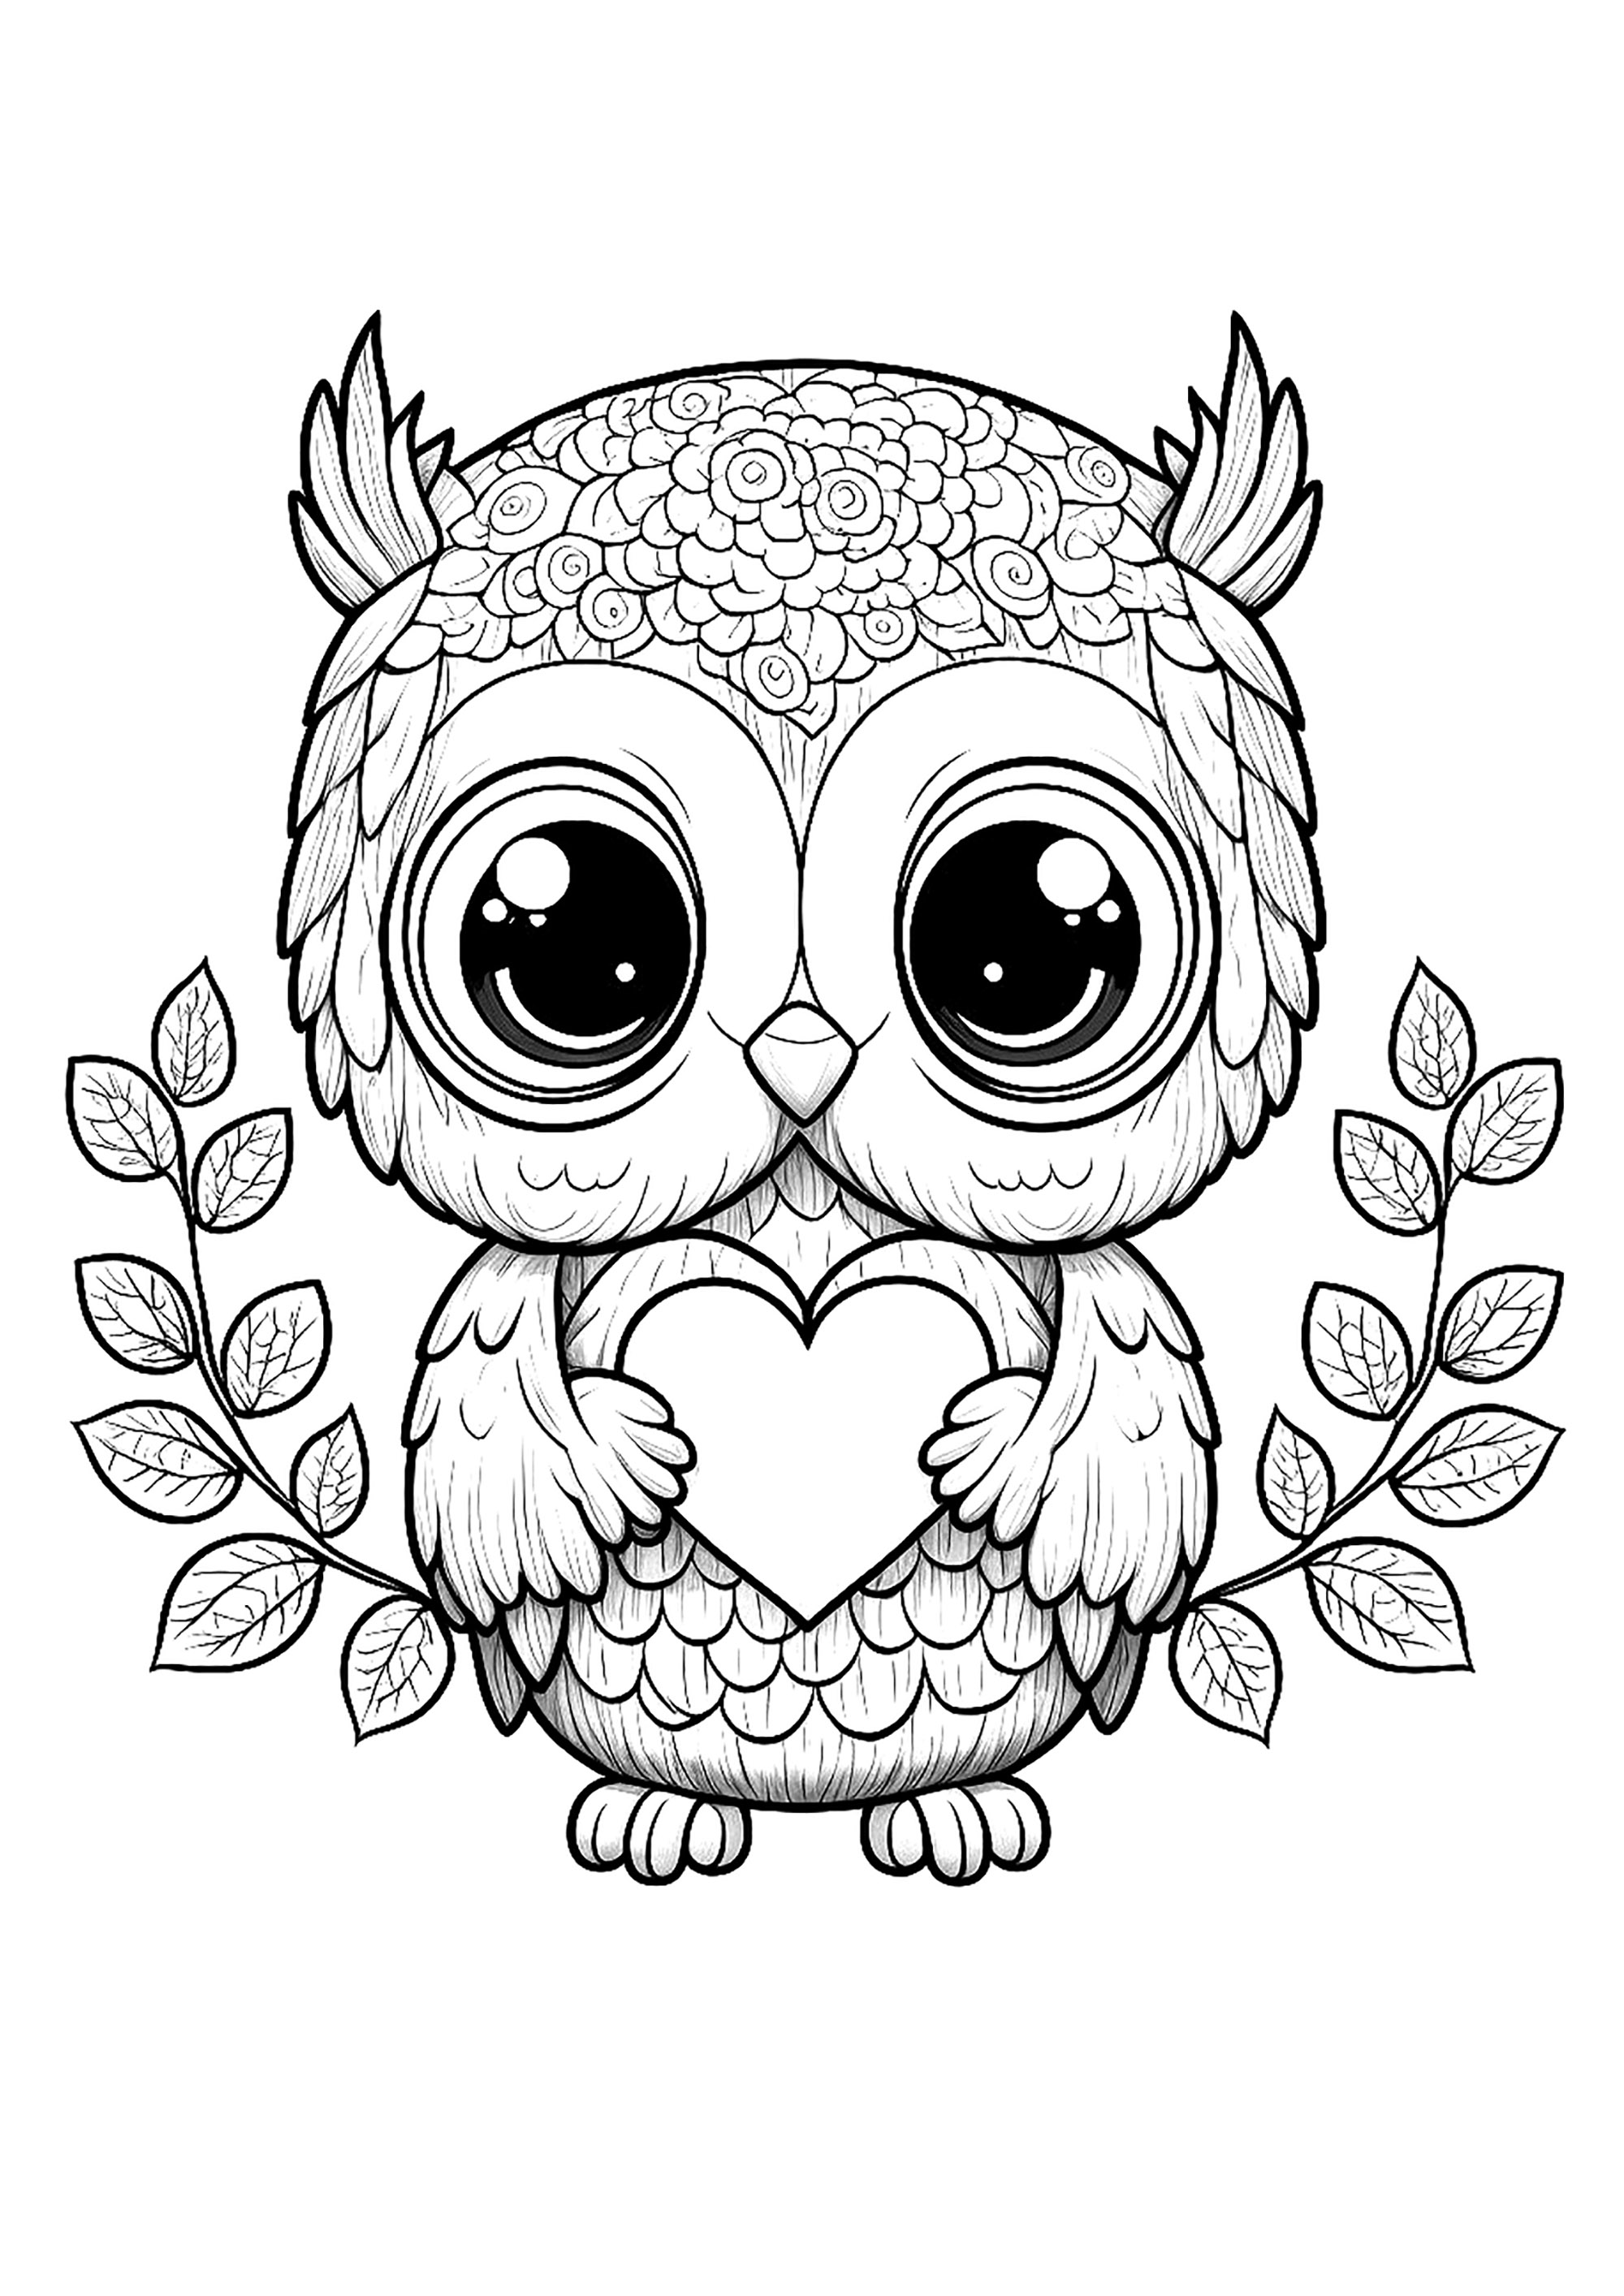 Coloring of a little owl looking all shy, holding a heart near him. The details are realistic, and kids can have fun adding little details to make it even cuter. The heart shape is simple, making it an easy pattern to color. Kids can also add little touches to make it more unique.